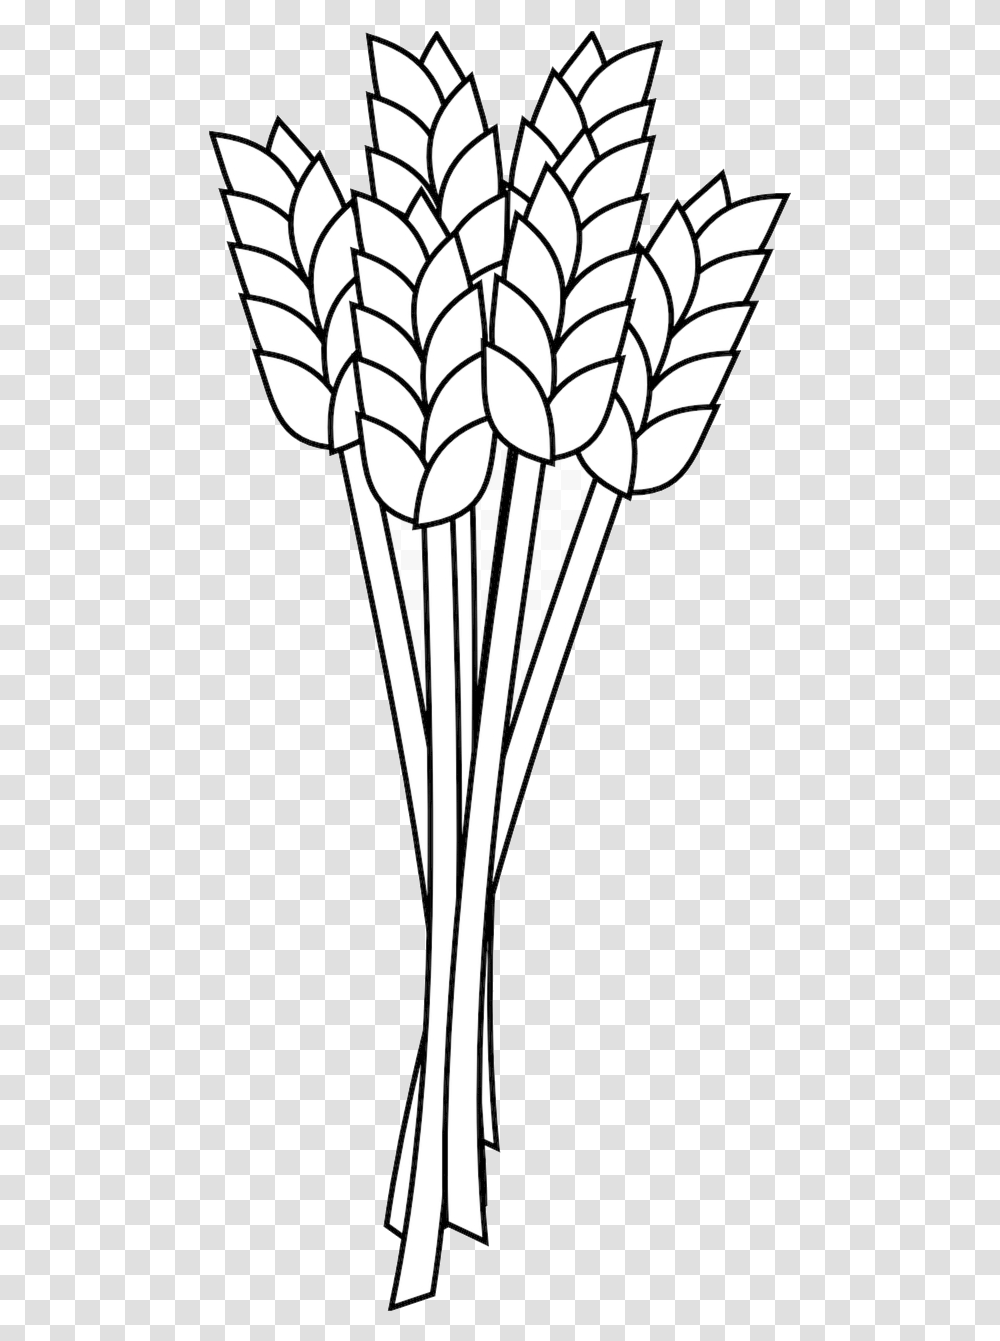 Animated Picture Of Wheat Cartoons Grains Clipart Black And White, Lamp, Couch, Furniture, Lighting Transparent Png